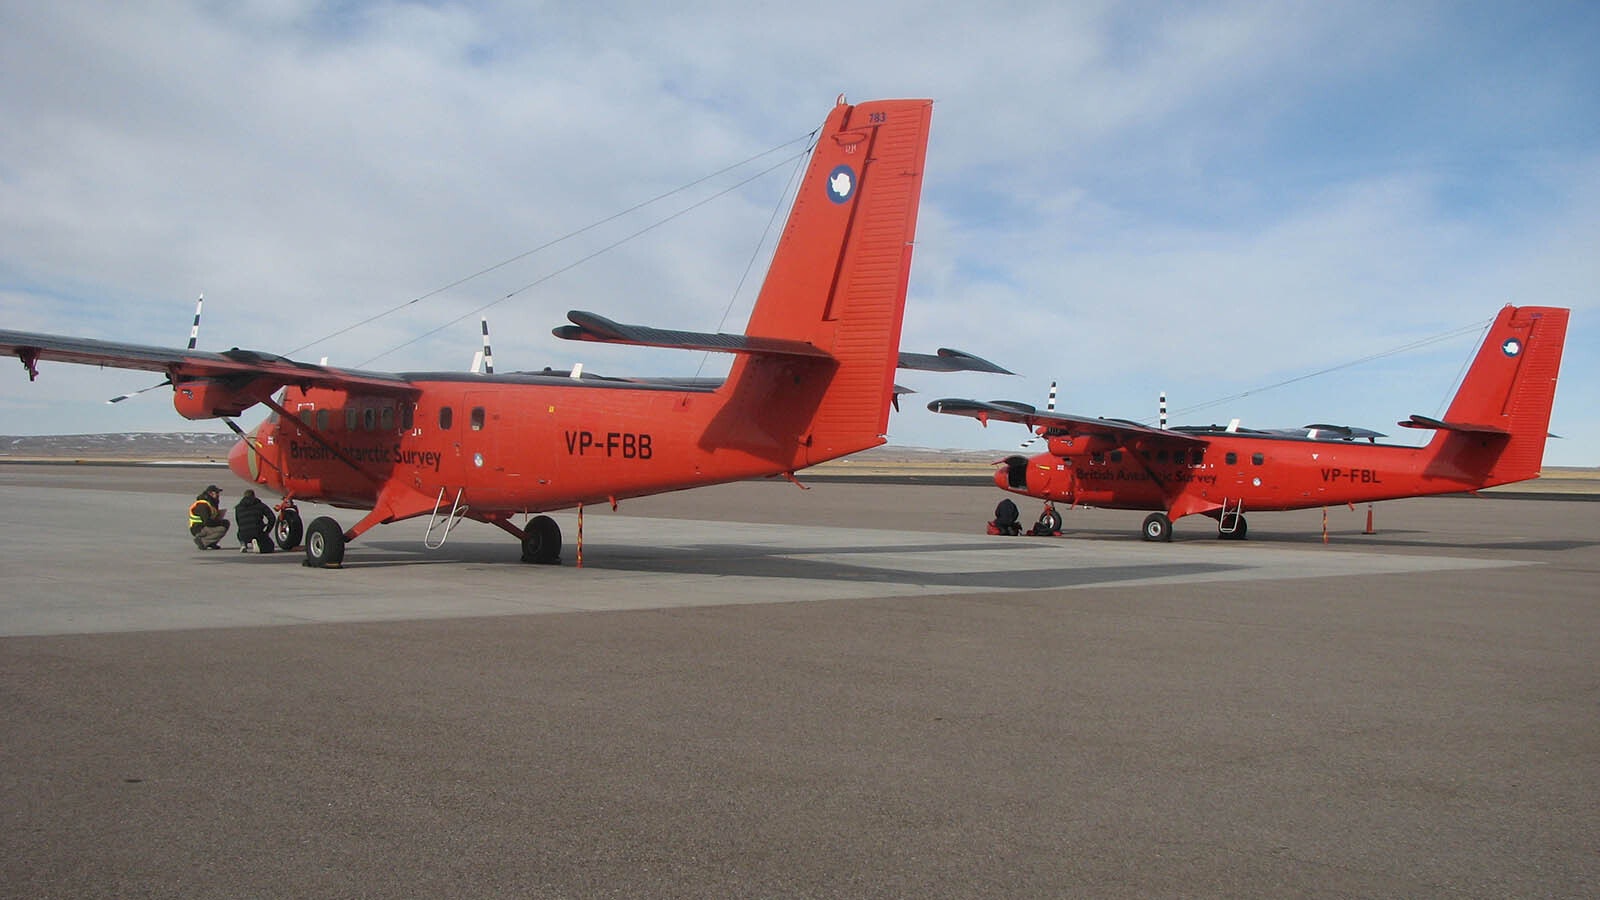 Planes from the British Antarctica Survey out of Canada stop in to get cleared to enter the country.